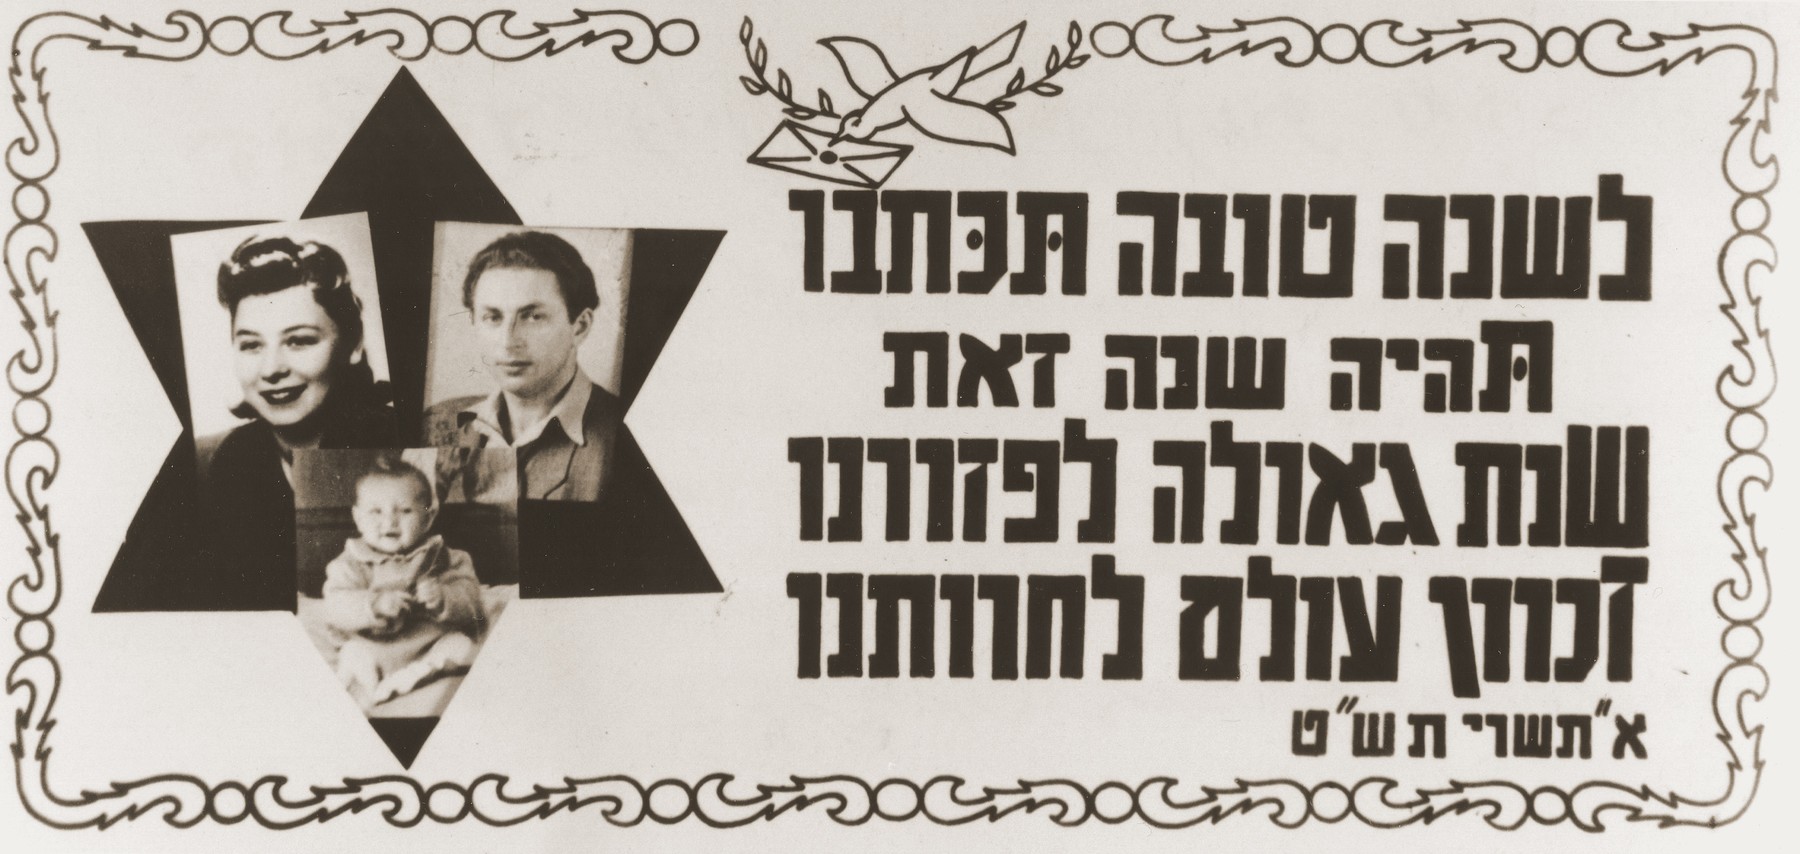 A personalized Jewish New Year's card with photographs of a DP family.

The card was sent by the cousins of Moryc Breitbart, the donor's husband.  The Hebrew text reads: "May you be inscribed for a good year.  May it be a year of redemption for our dispersed.  An eternal memory of our freedom."